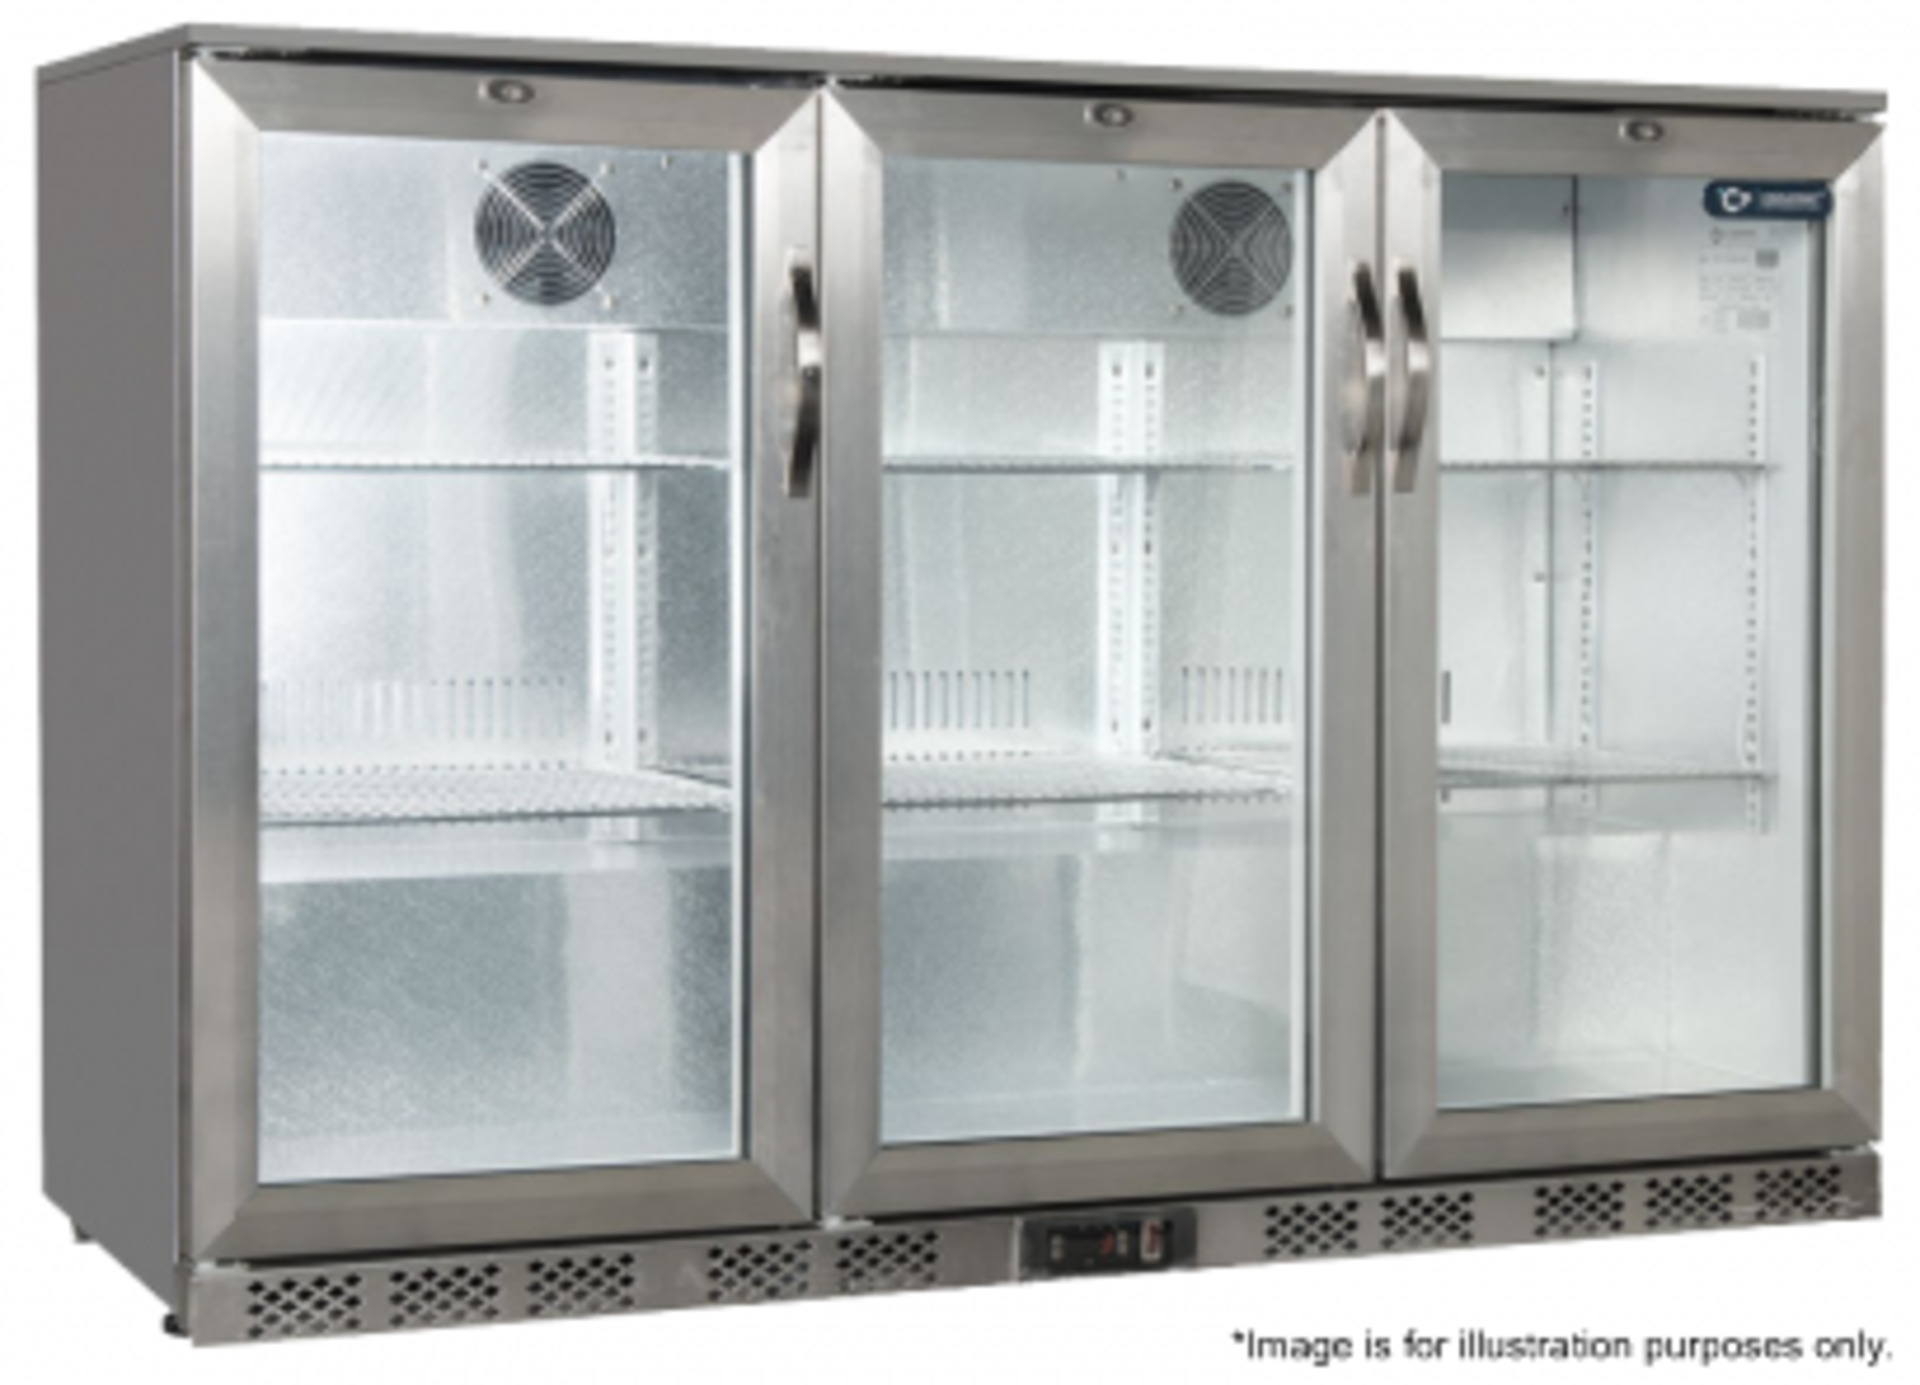 1 x COOLPOINT HXST310 Triple Hinged Glass Door Cooler In Stainless Steel - Dimensions: H95 x W135